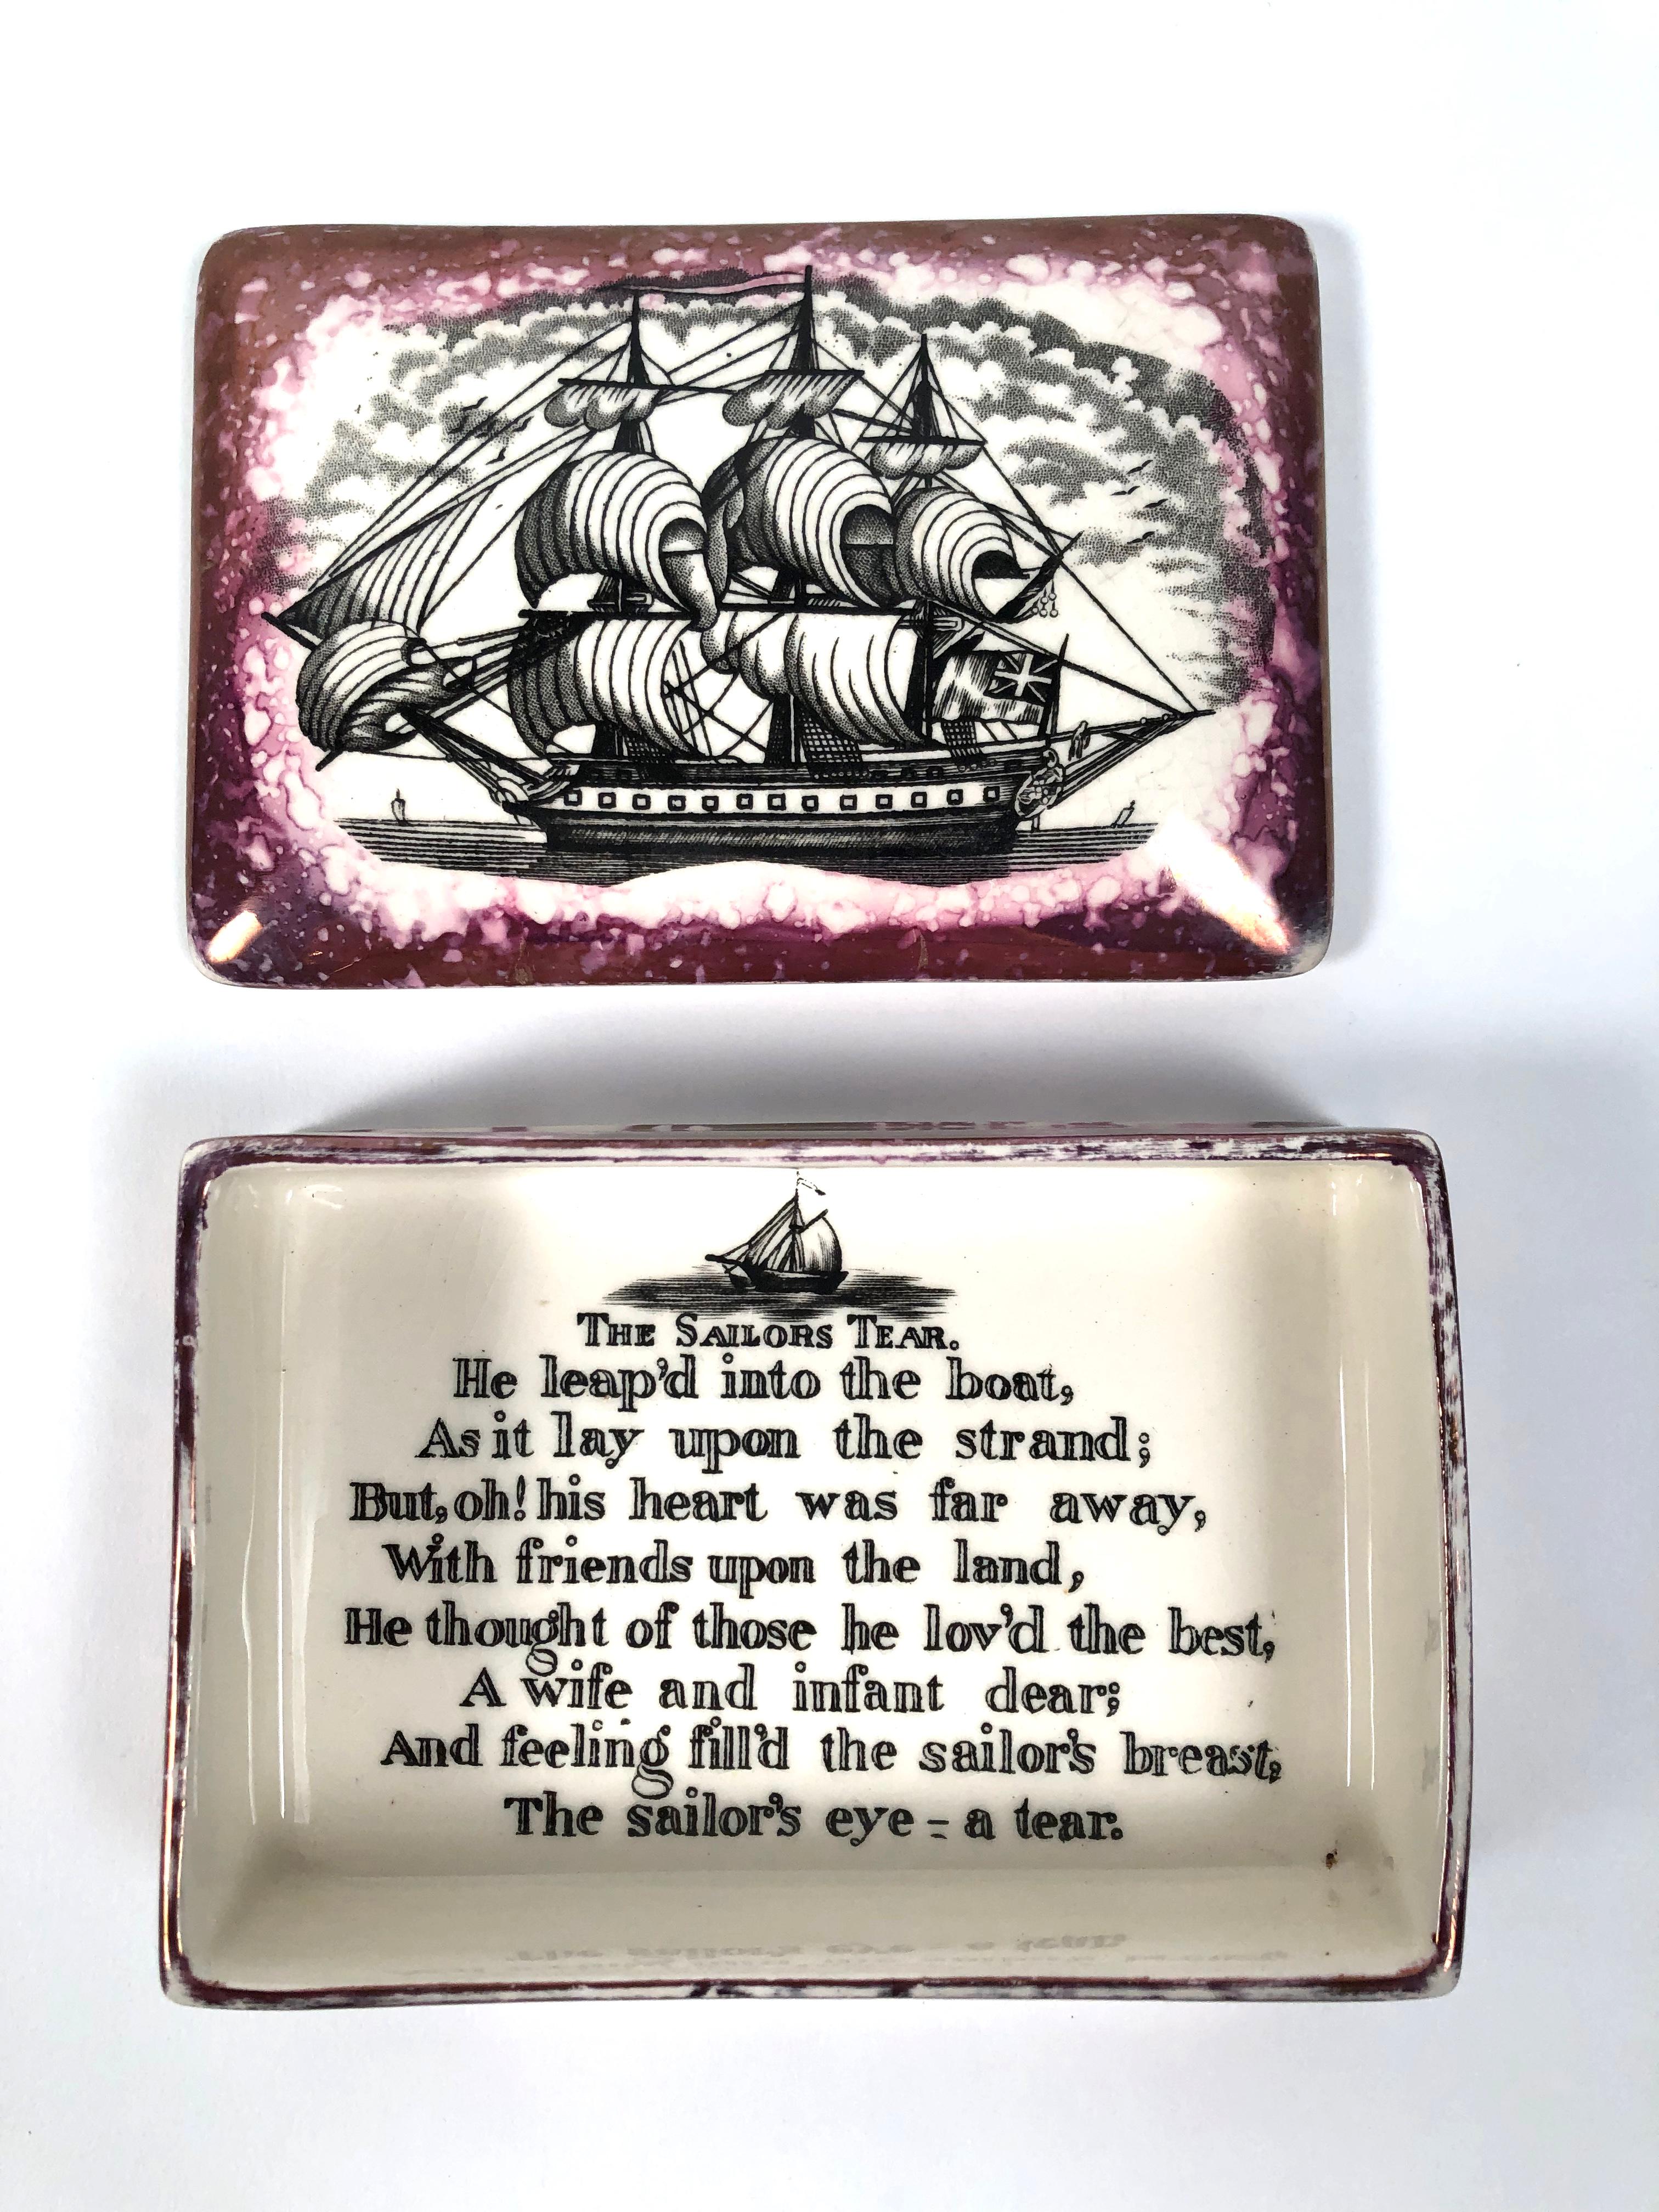 A Staffordshire Sunderland lusterware porcelain covered box of rectangular form, the domed top with black transferware decoration, depicting a large ship at full sail, the interior with sentimental sailor's verse printed inside at the bottom:

The